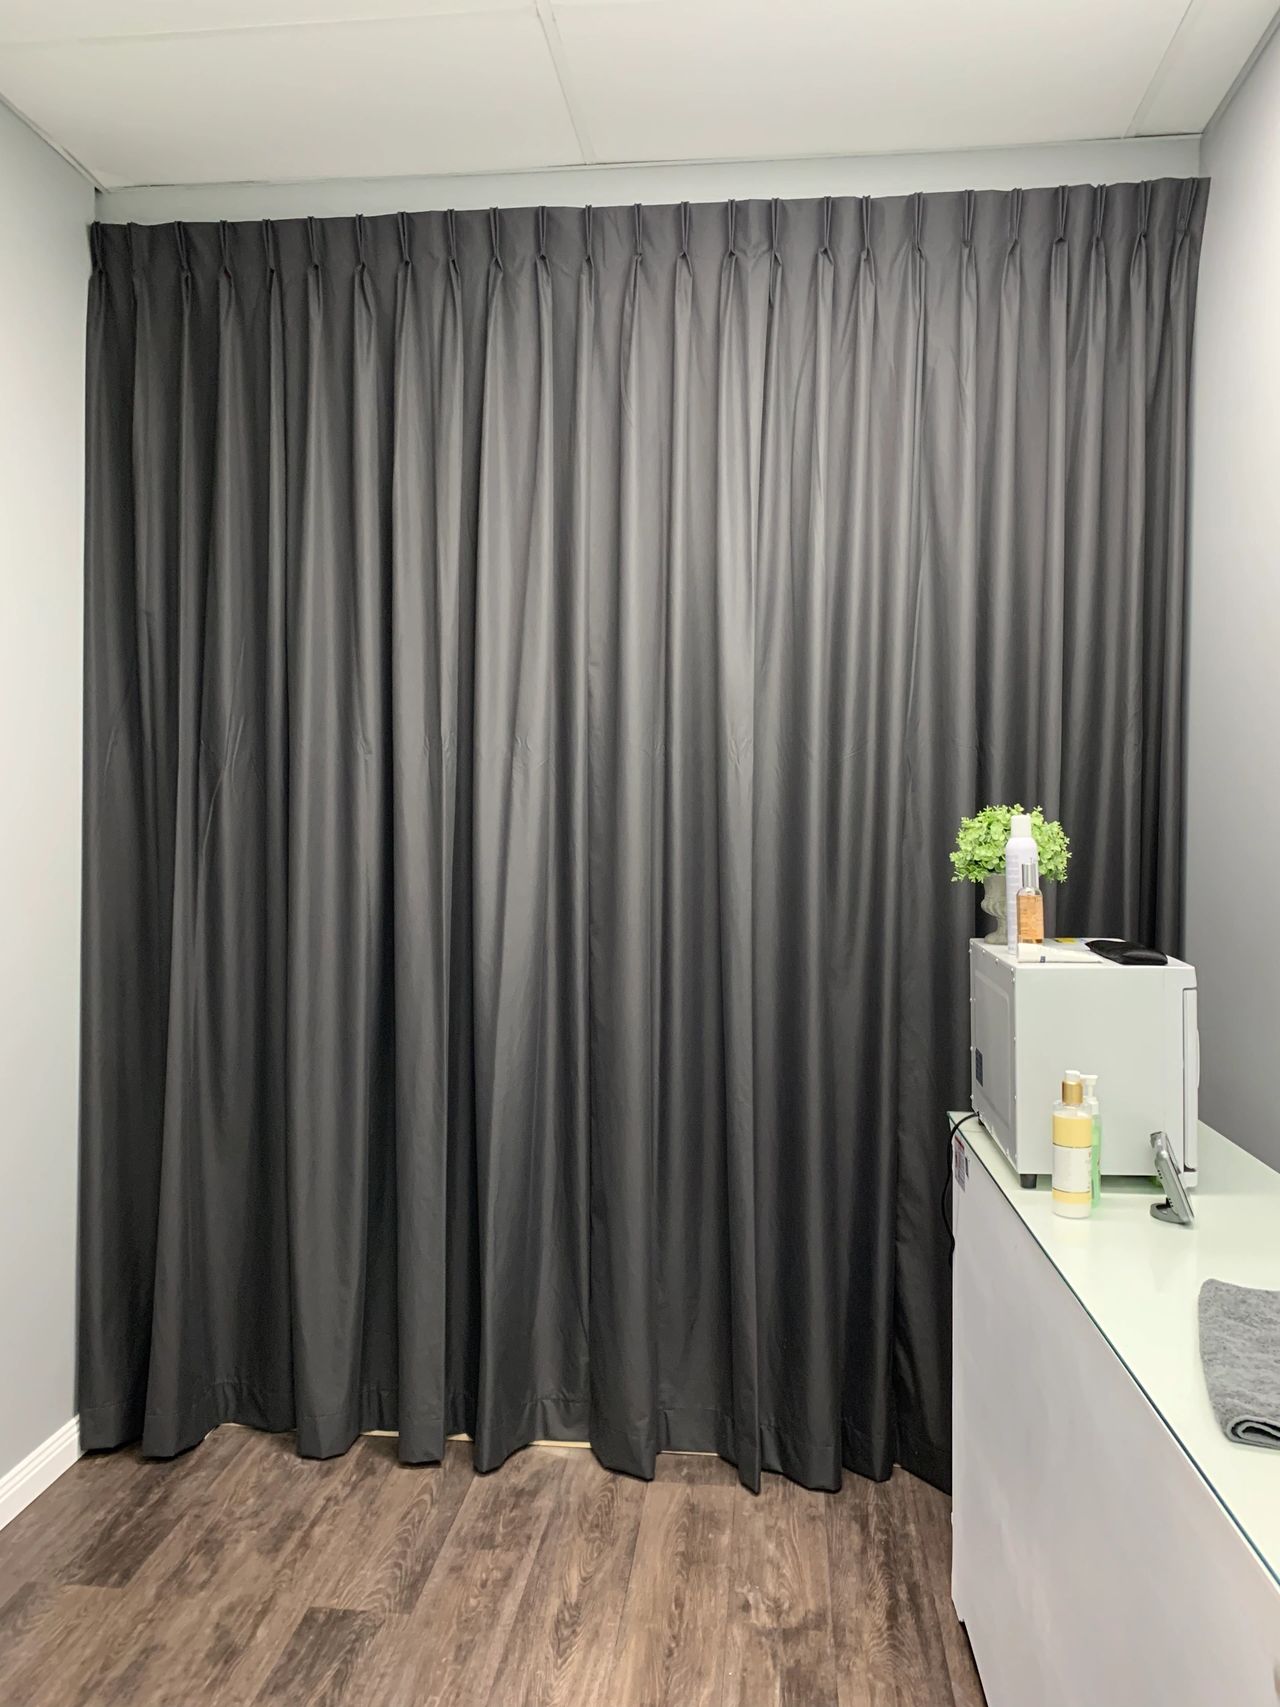 What curtains keep the warmth in your home during winter?